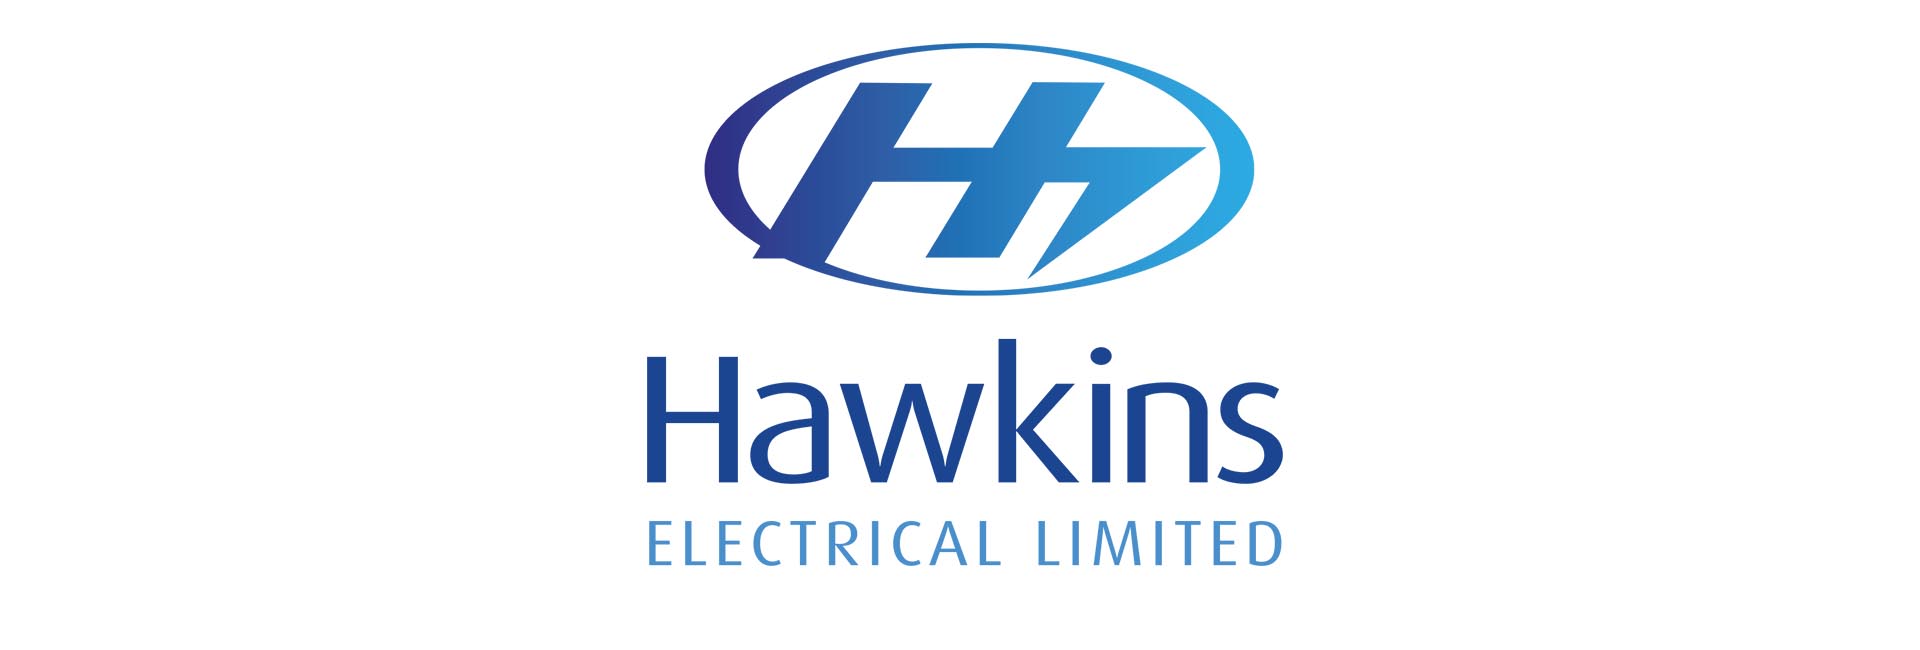 Bishopsgate finishes the year with the sale of Hawkins Electrical to RSK Group